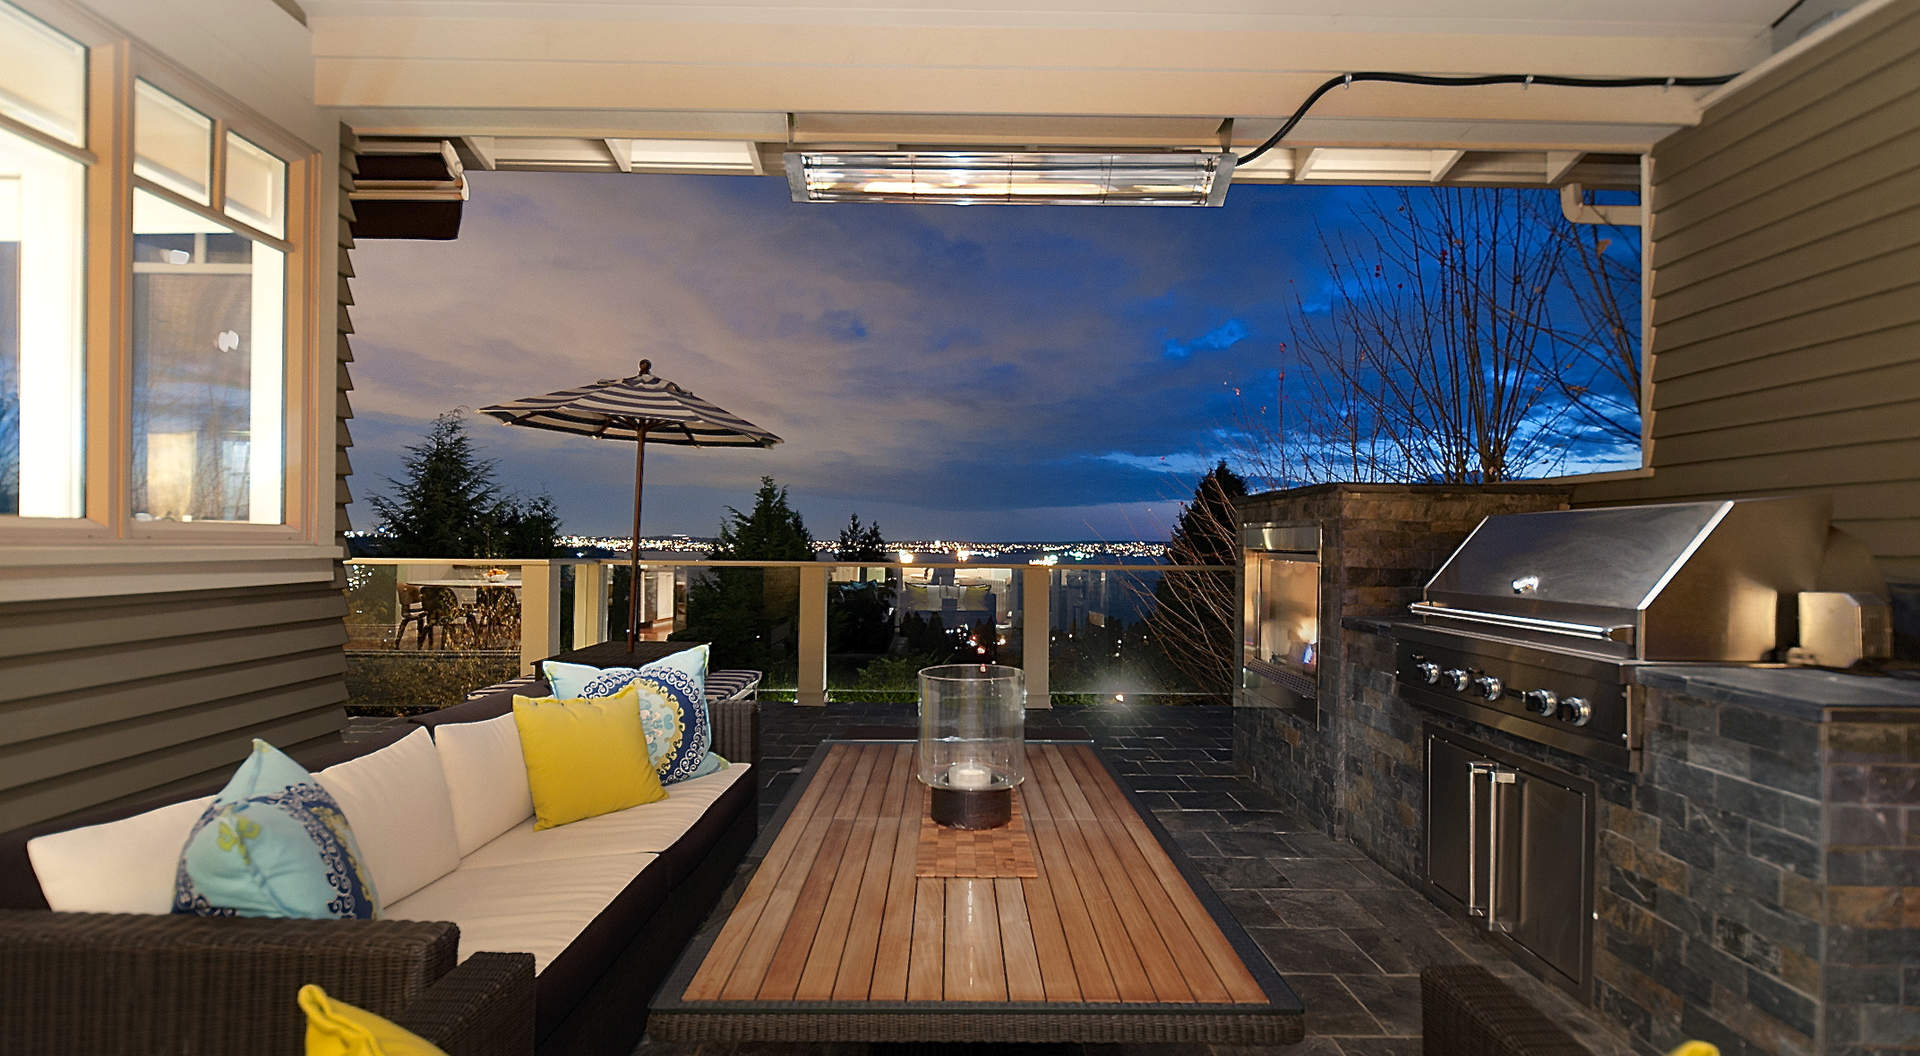 Sensational Outdoor Entertainment Area with Fireplace & BBQ Center